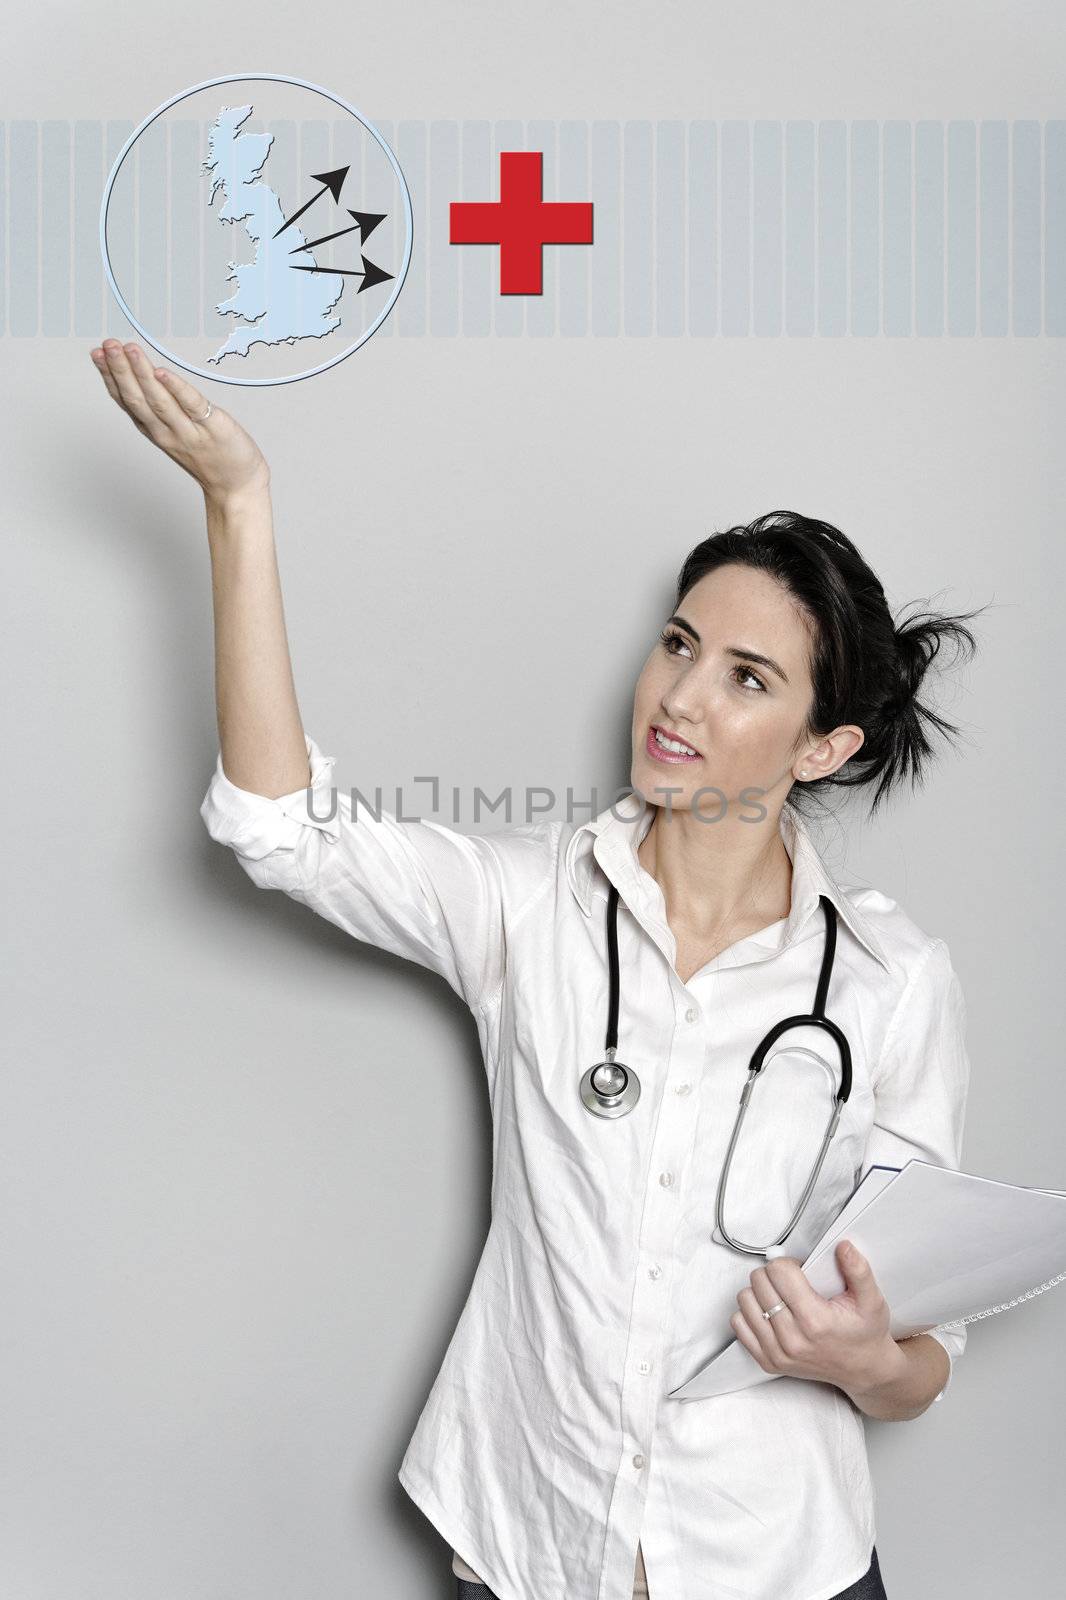 Beautiful female doctor holding a concept red cross button